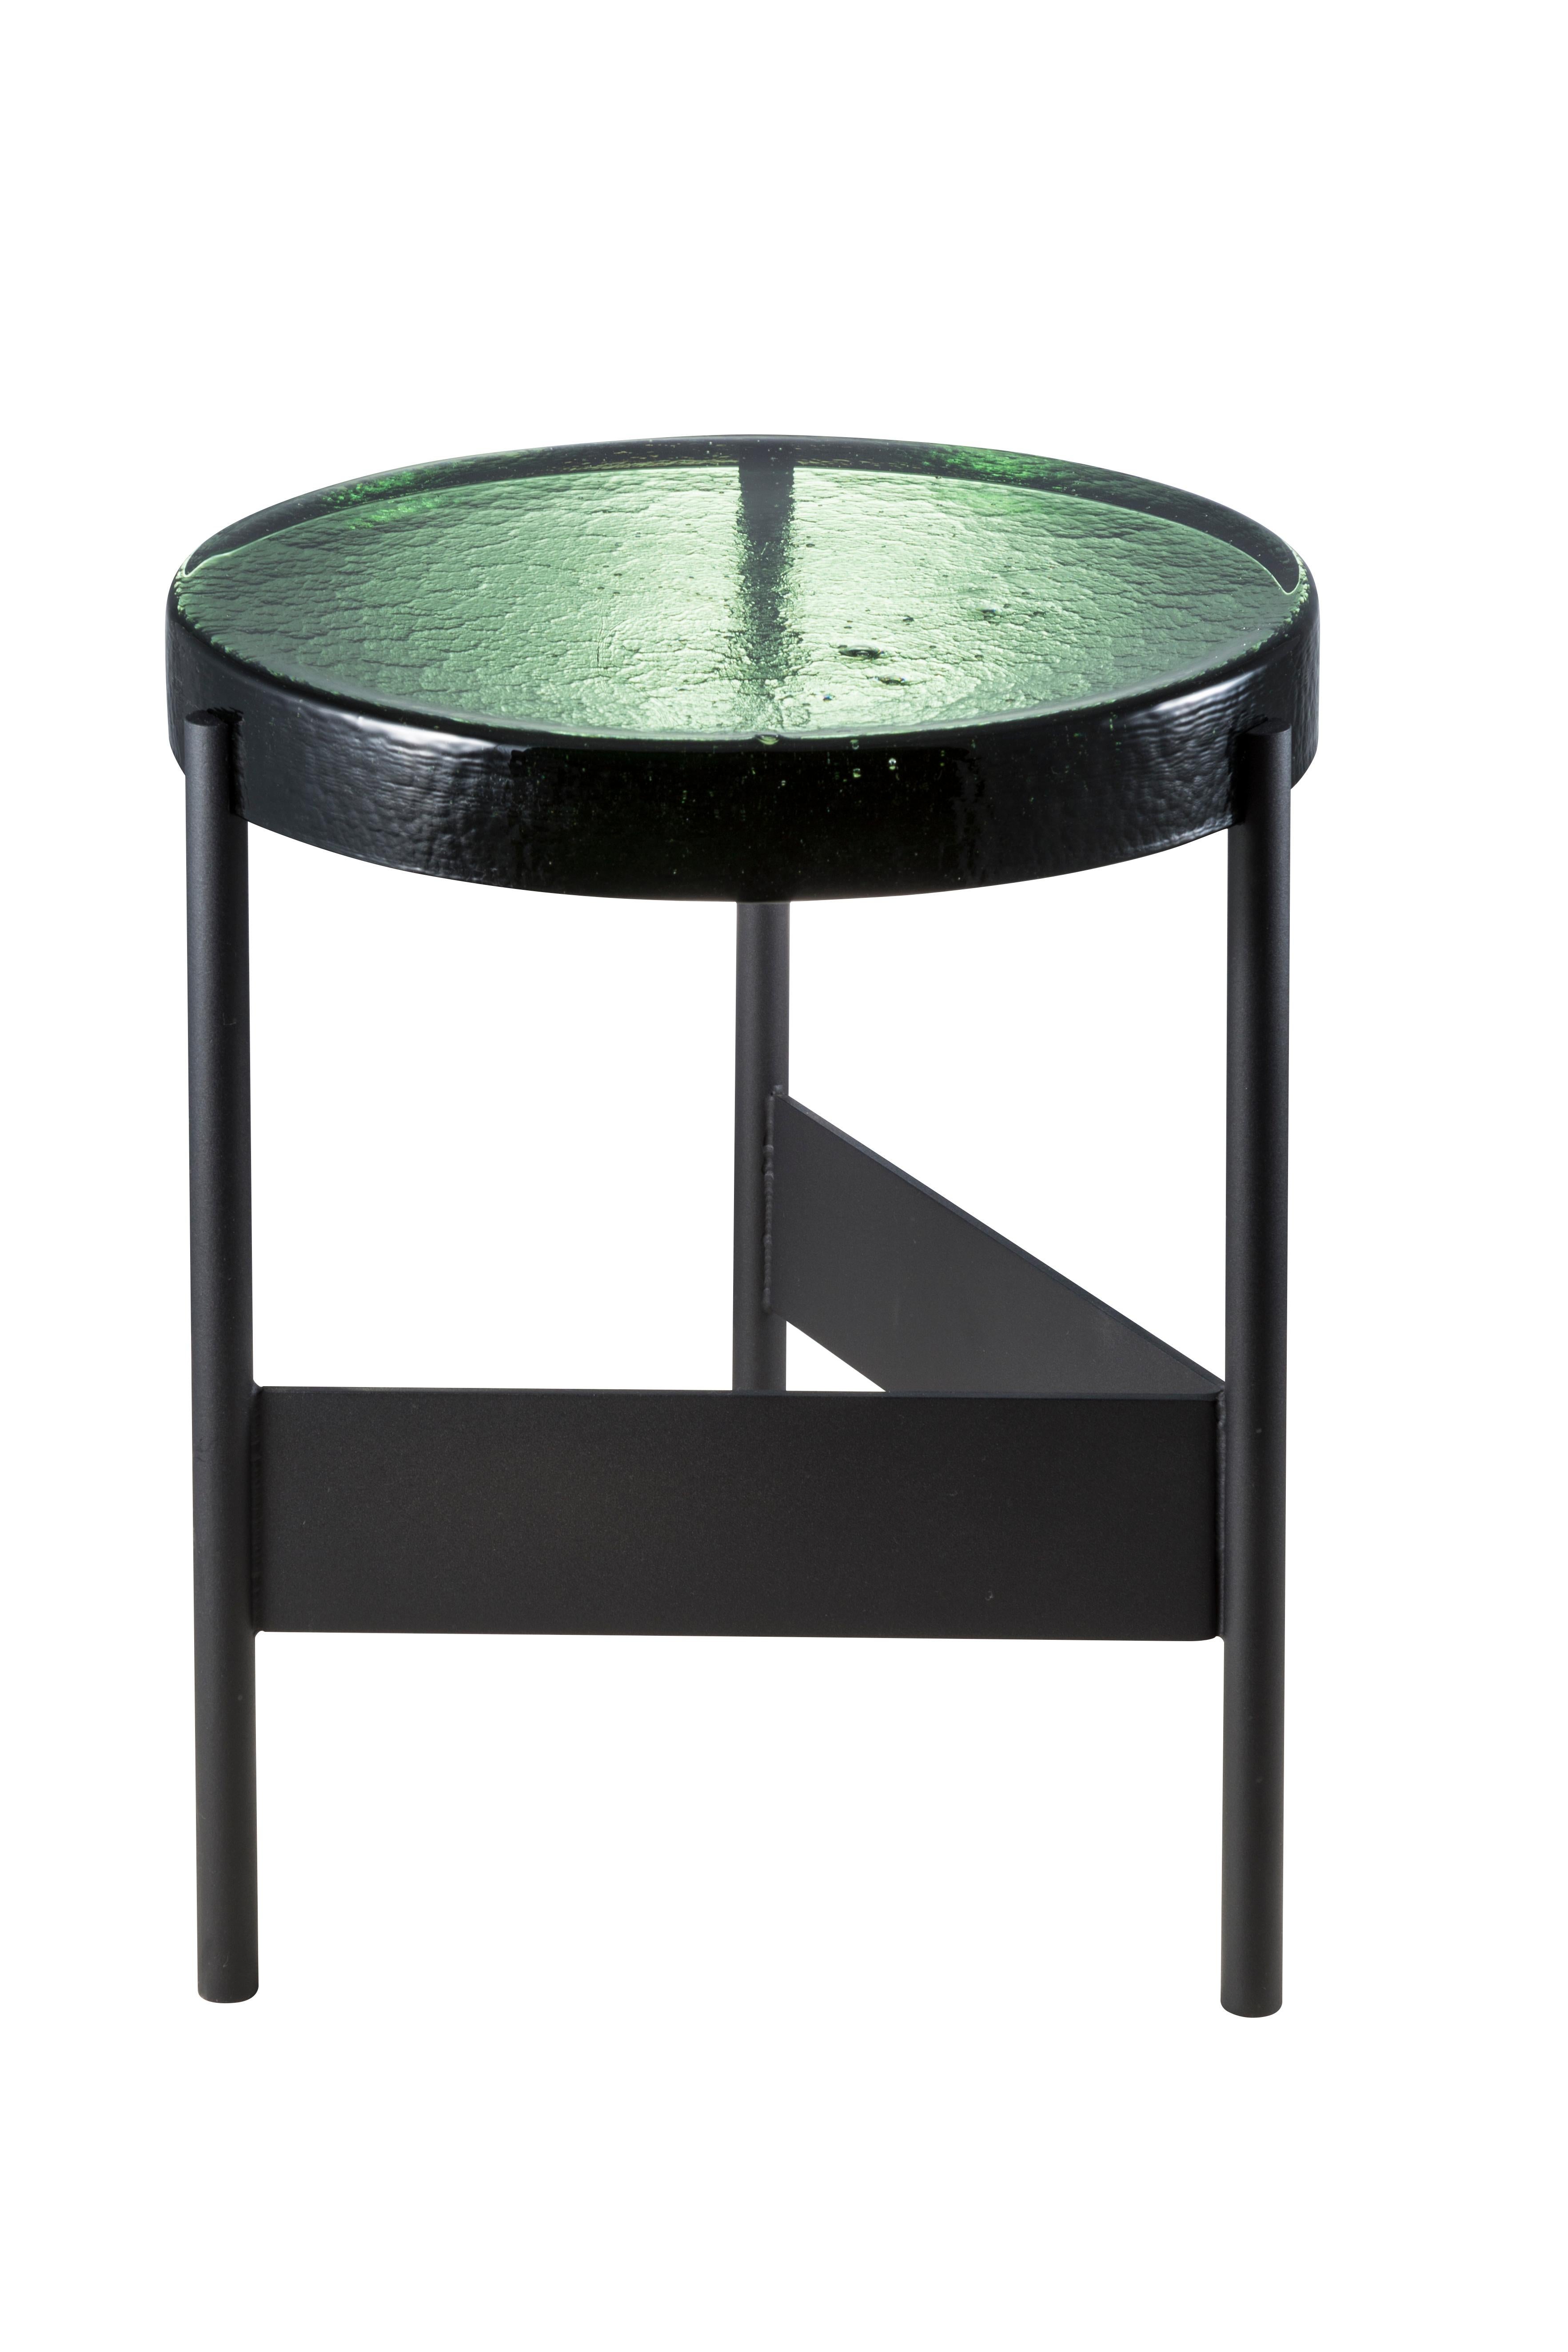 Alwa two green black side table by Pulpo.
Dimensions: D38 x H44 cm.
Materials: casted glass; powder coated steel.

Also available in different finishes. 

Normally, glass is regarded as being lightweight with sharp edges. In contrast,